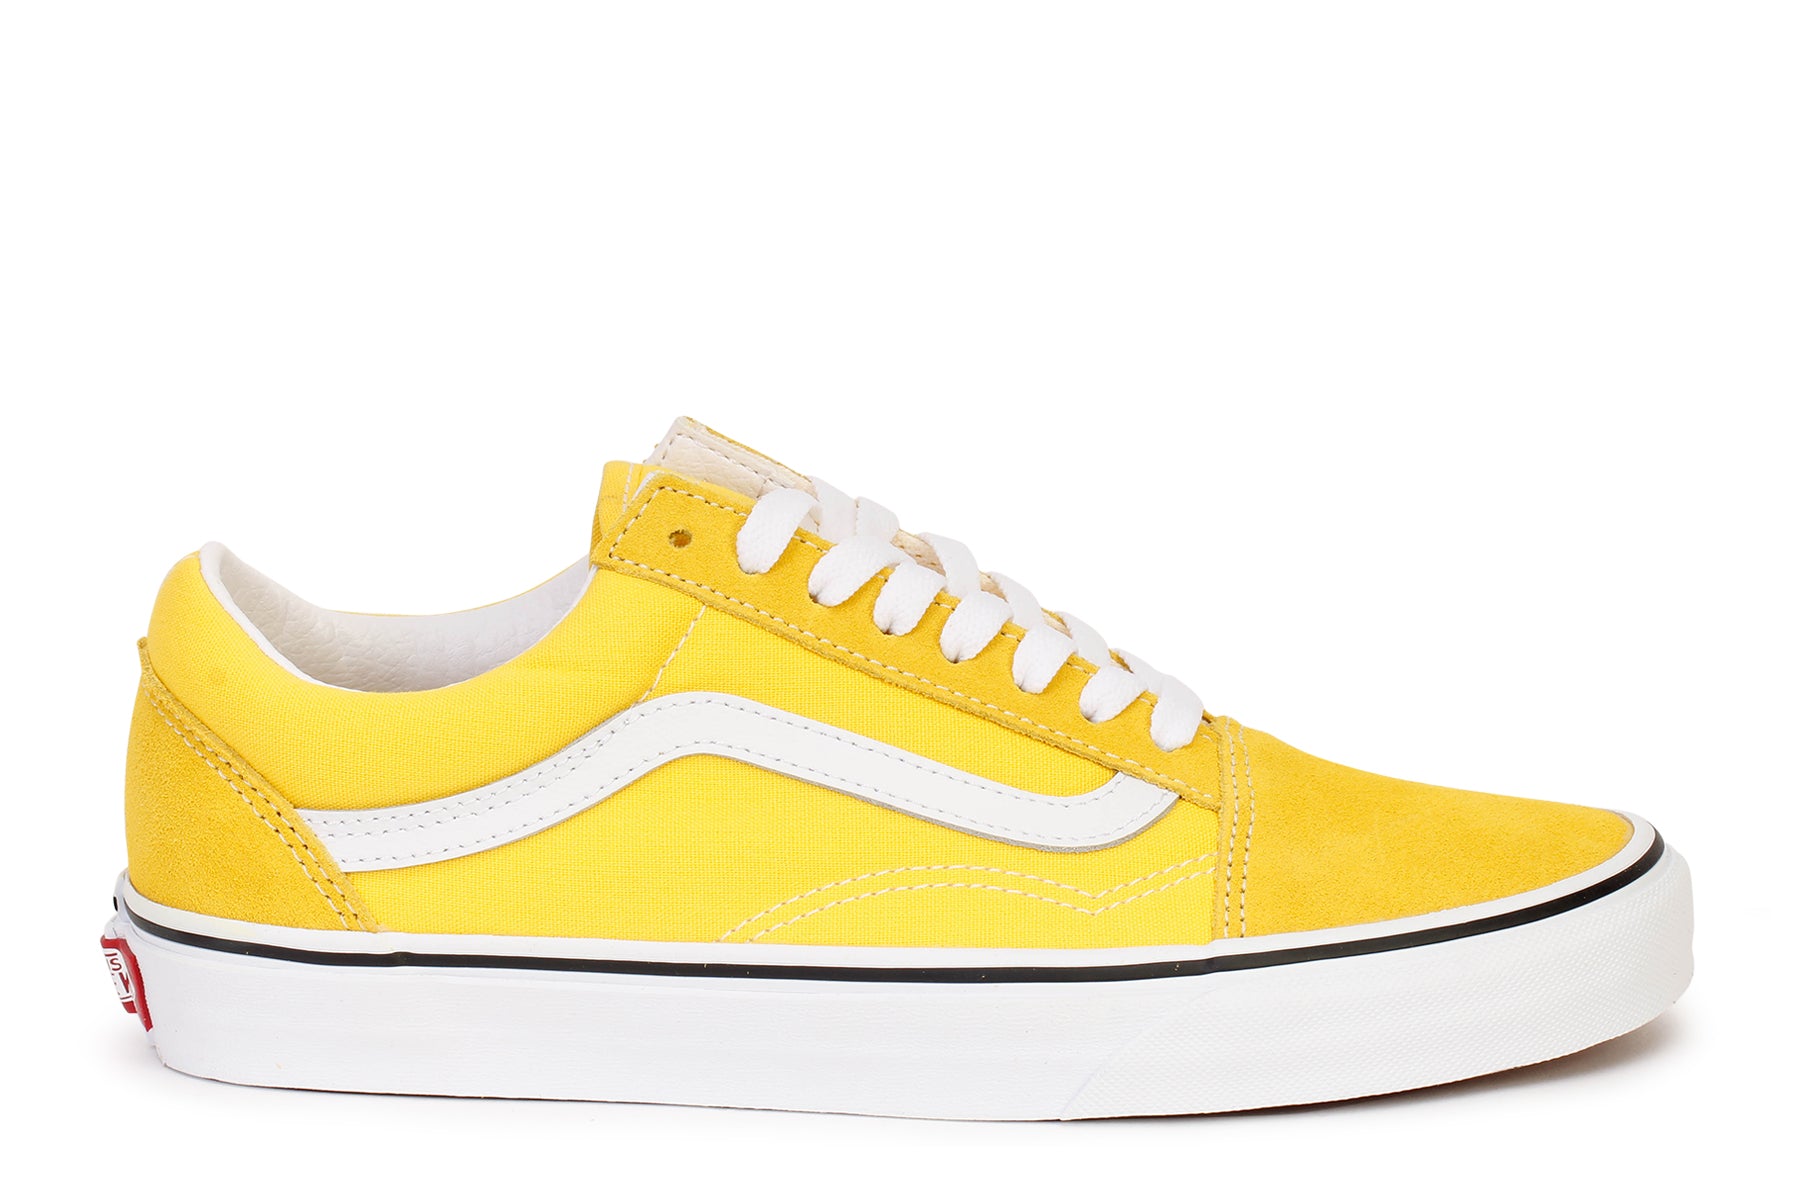 Vans Classic Slip On Checkerboard Cyber Yellow/White Skate Shoes Men's  Size 9.